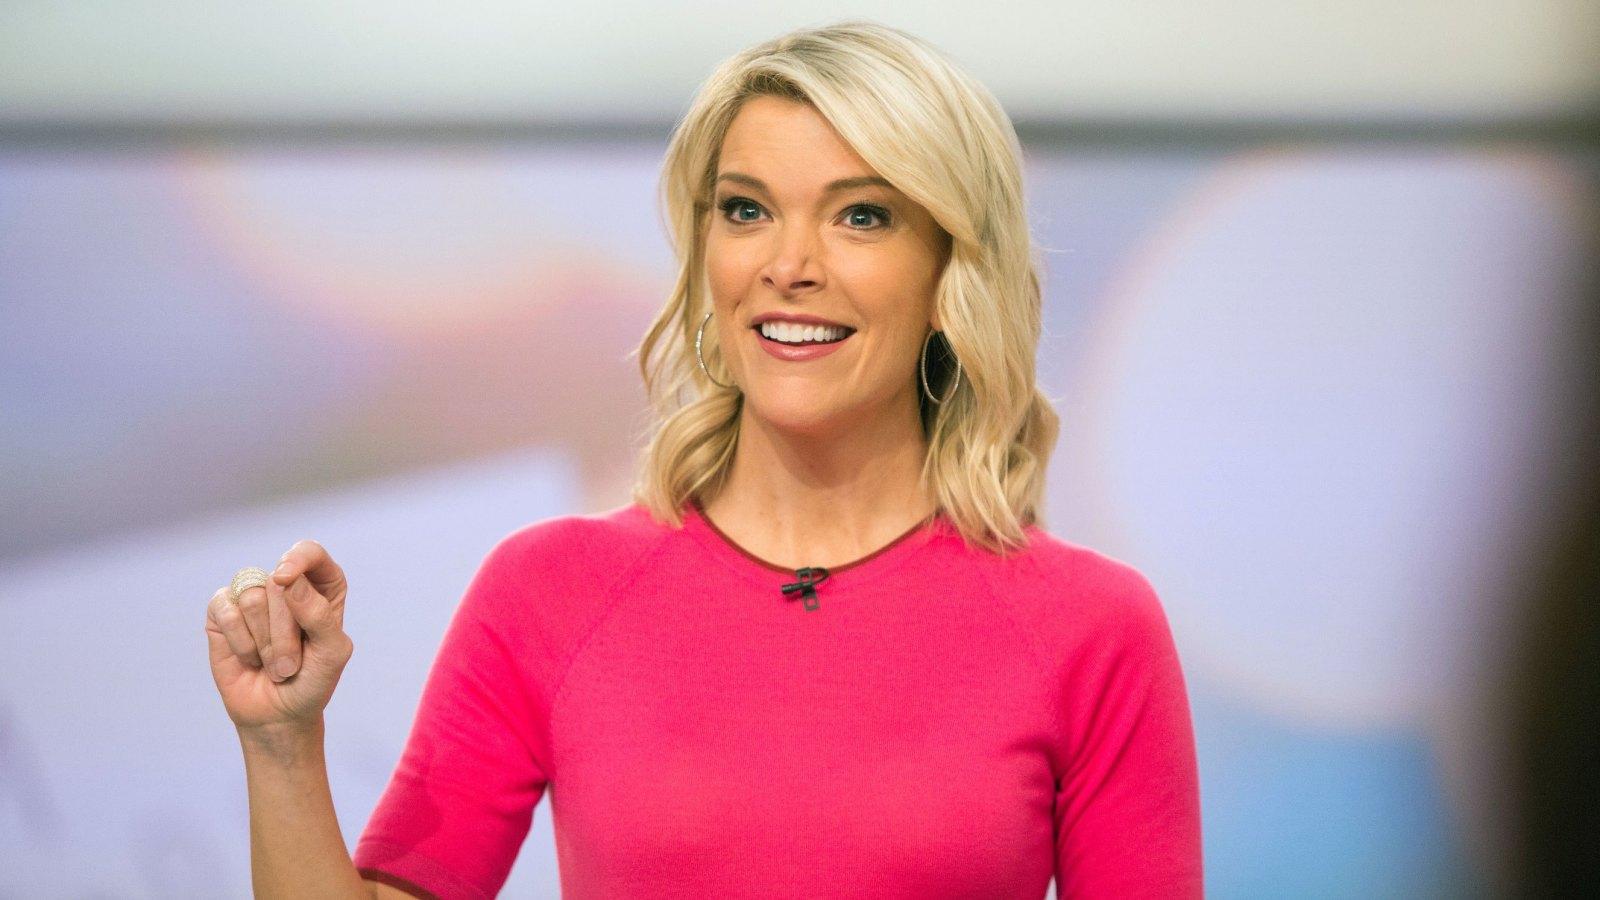 Megyn Kelly Reaches Deal With NBC 2 Months After Exit